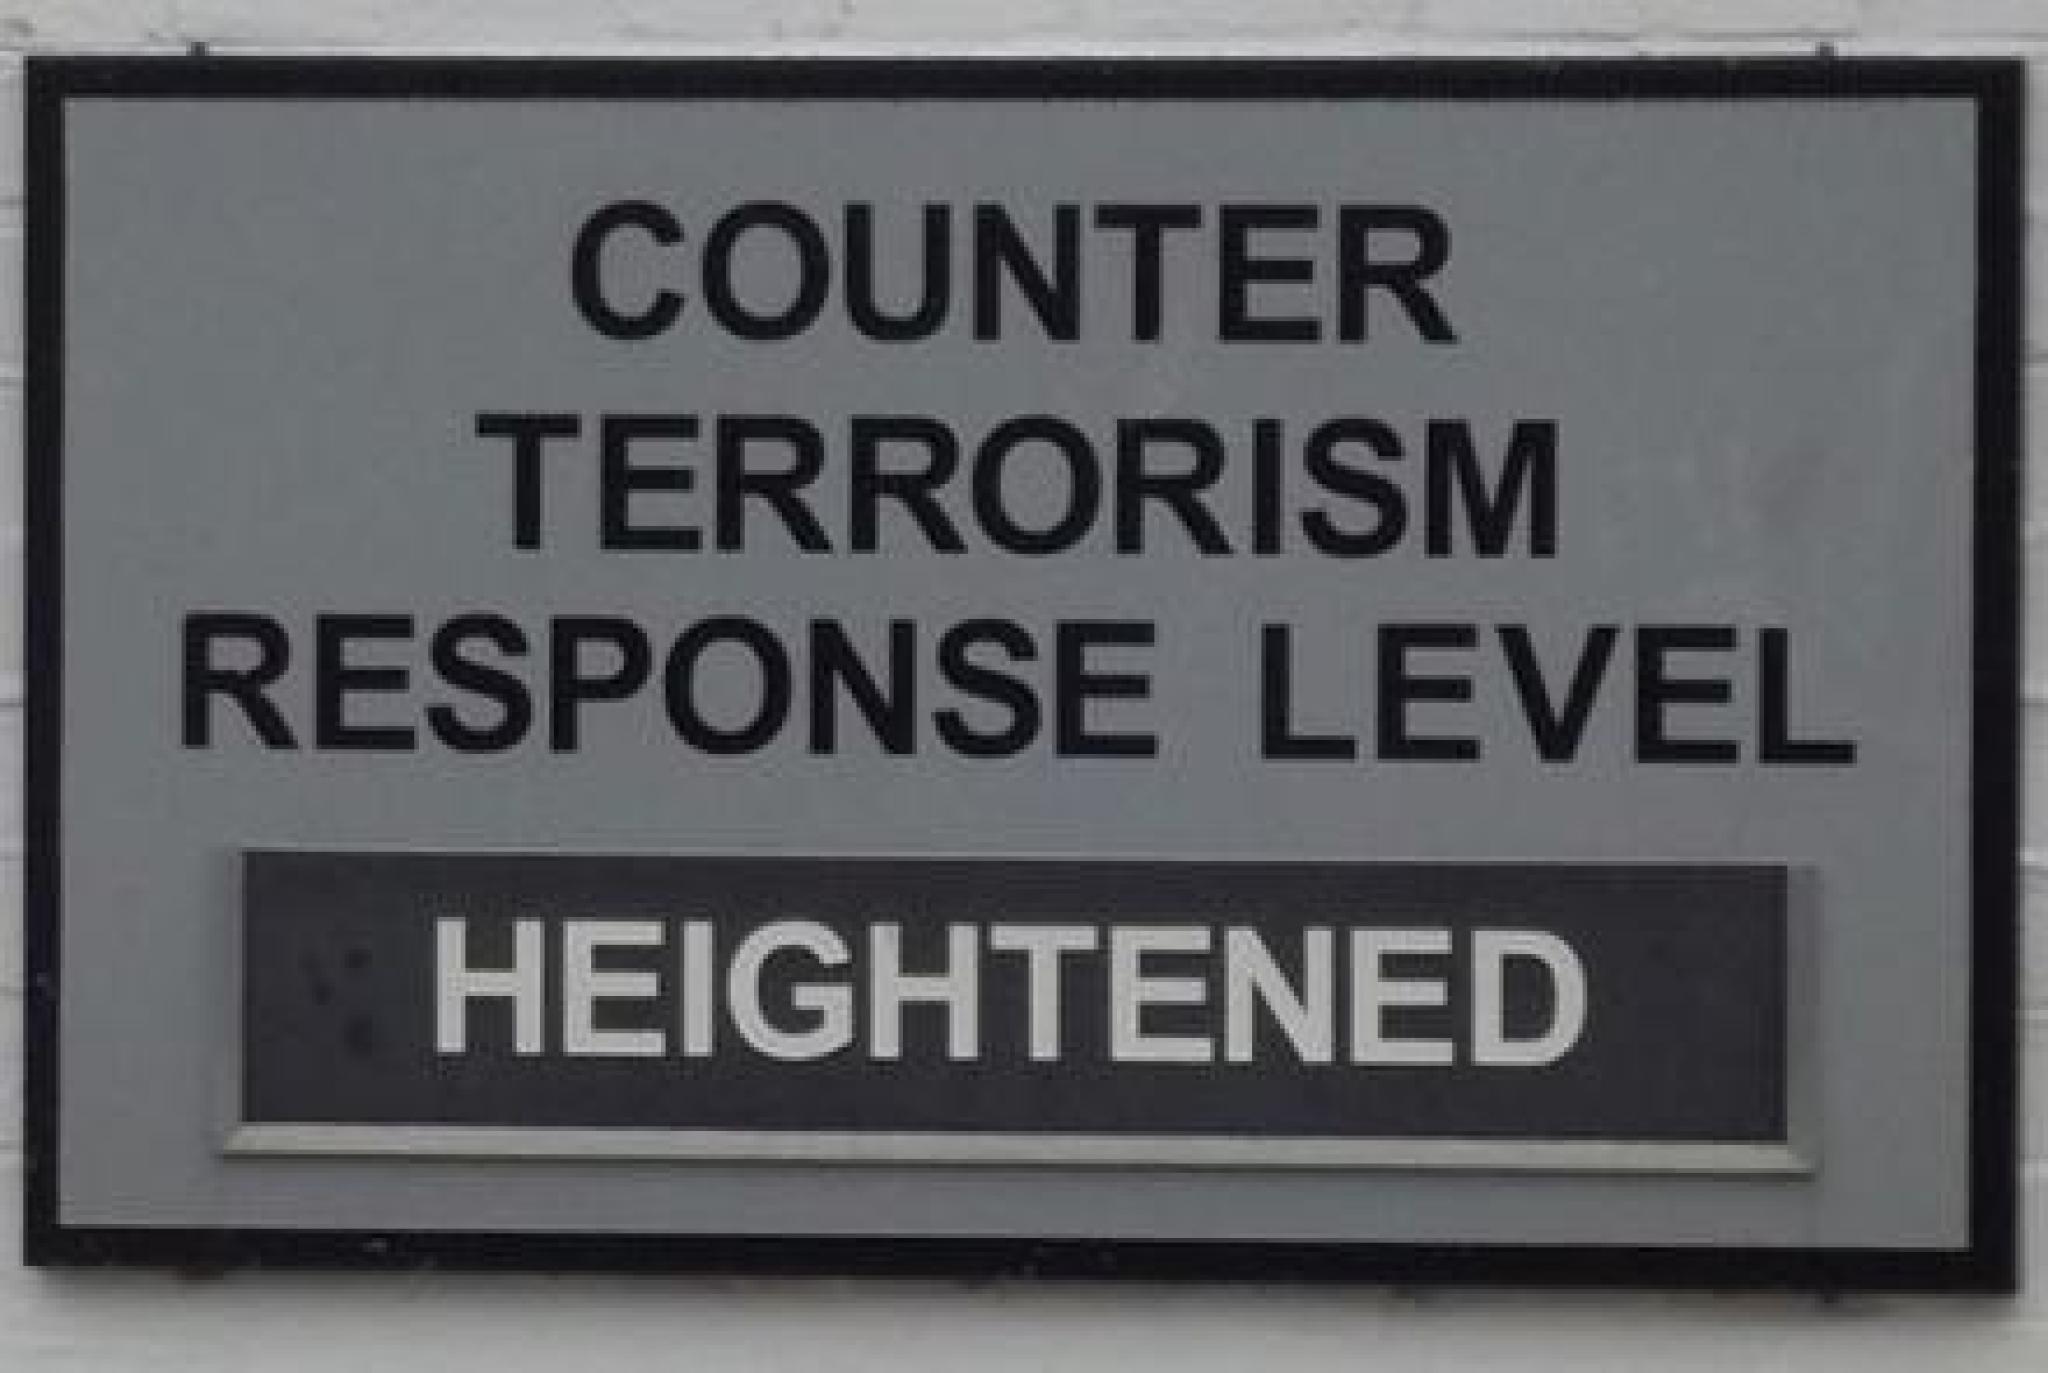 Image: Porter's Lodge Portsmouth Historic Dockyard Counter Terrorism Response Level Heightened by Elliott Brown, Flickr, CC-BY-2.0.